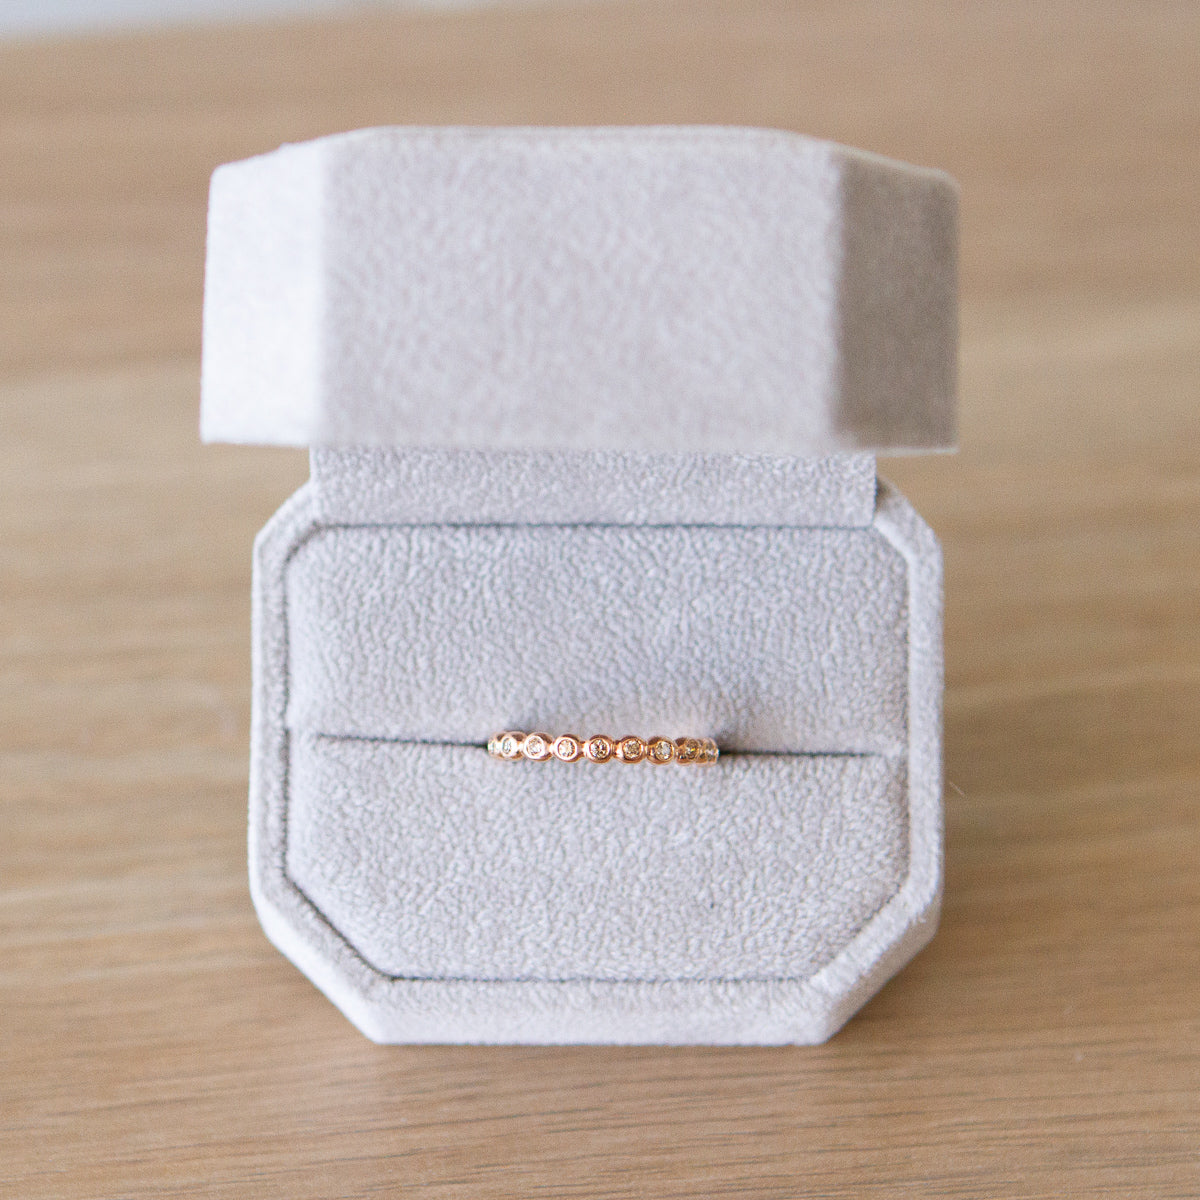 Champagne Diamond Droplet Band in Rose Gold by Corey Egan in a ring box